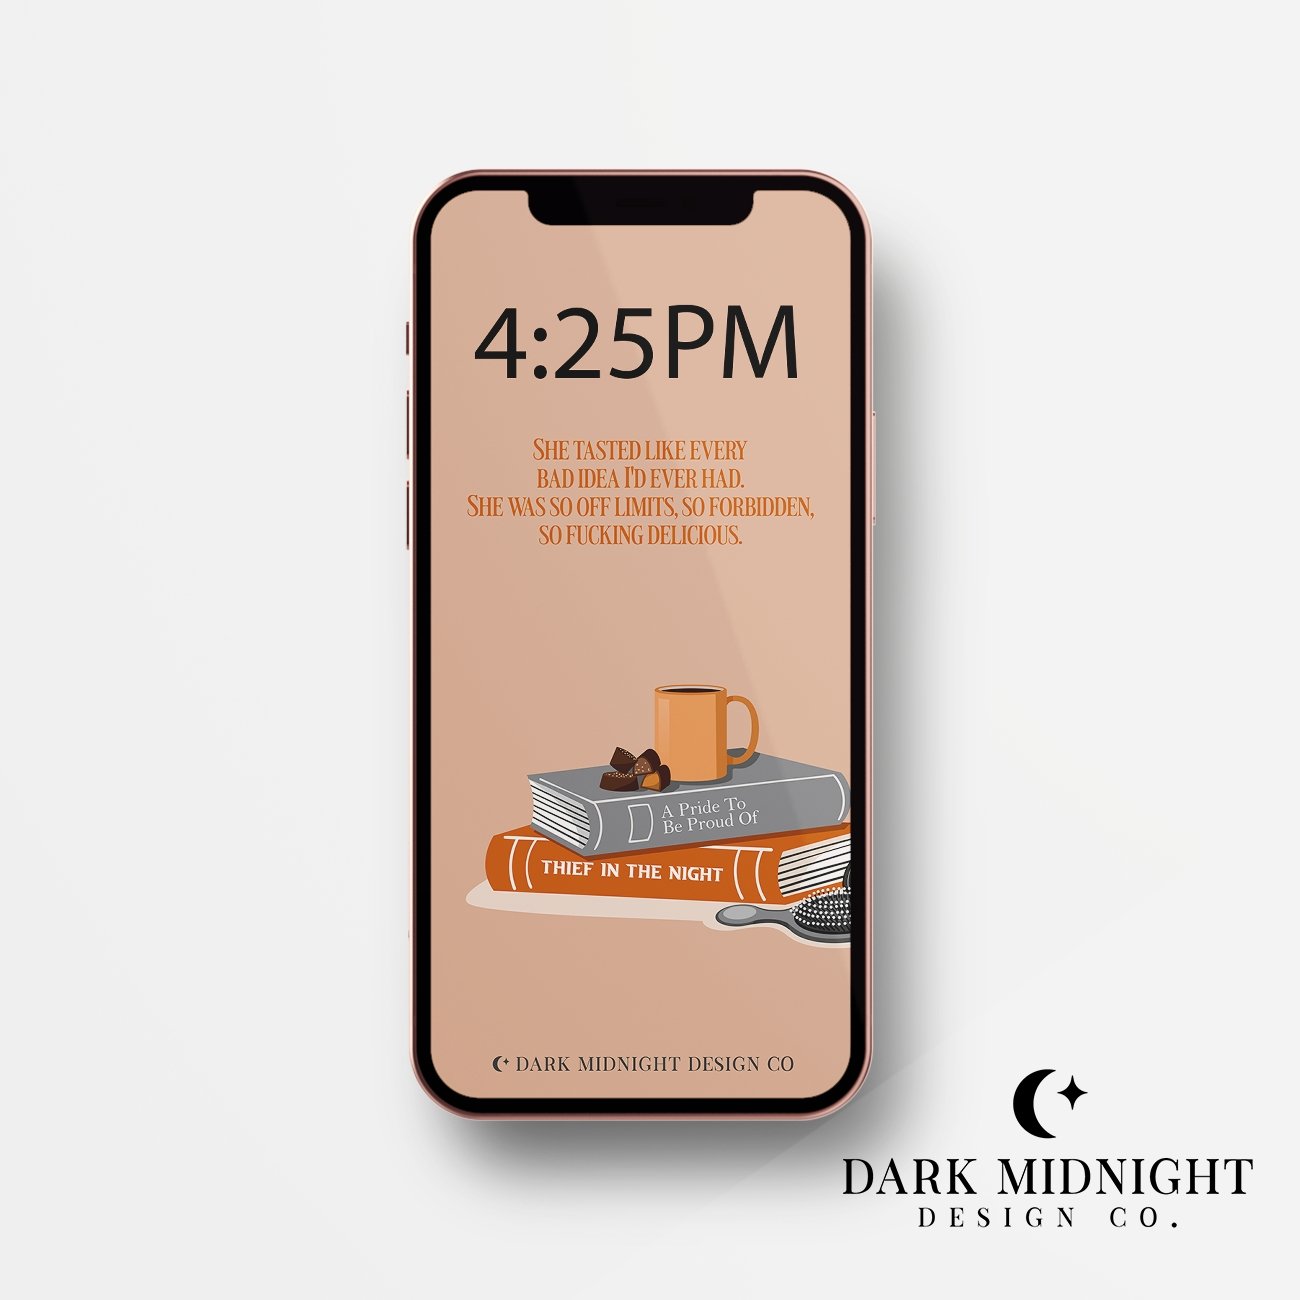 Character Anthology Phone Wallpaper - Roary Night - Officially Licensed Darkmore Penitentiary Phone Wallpaper - Dark Midnight Design Co